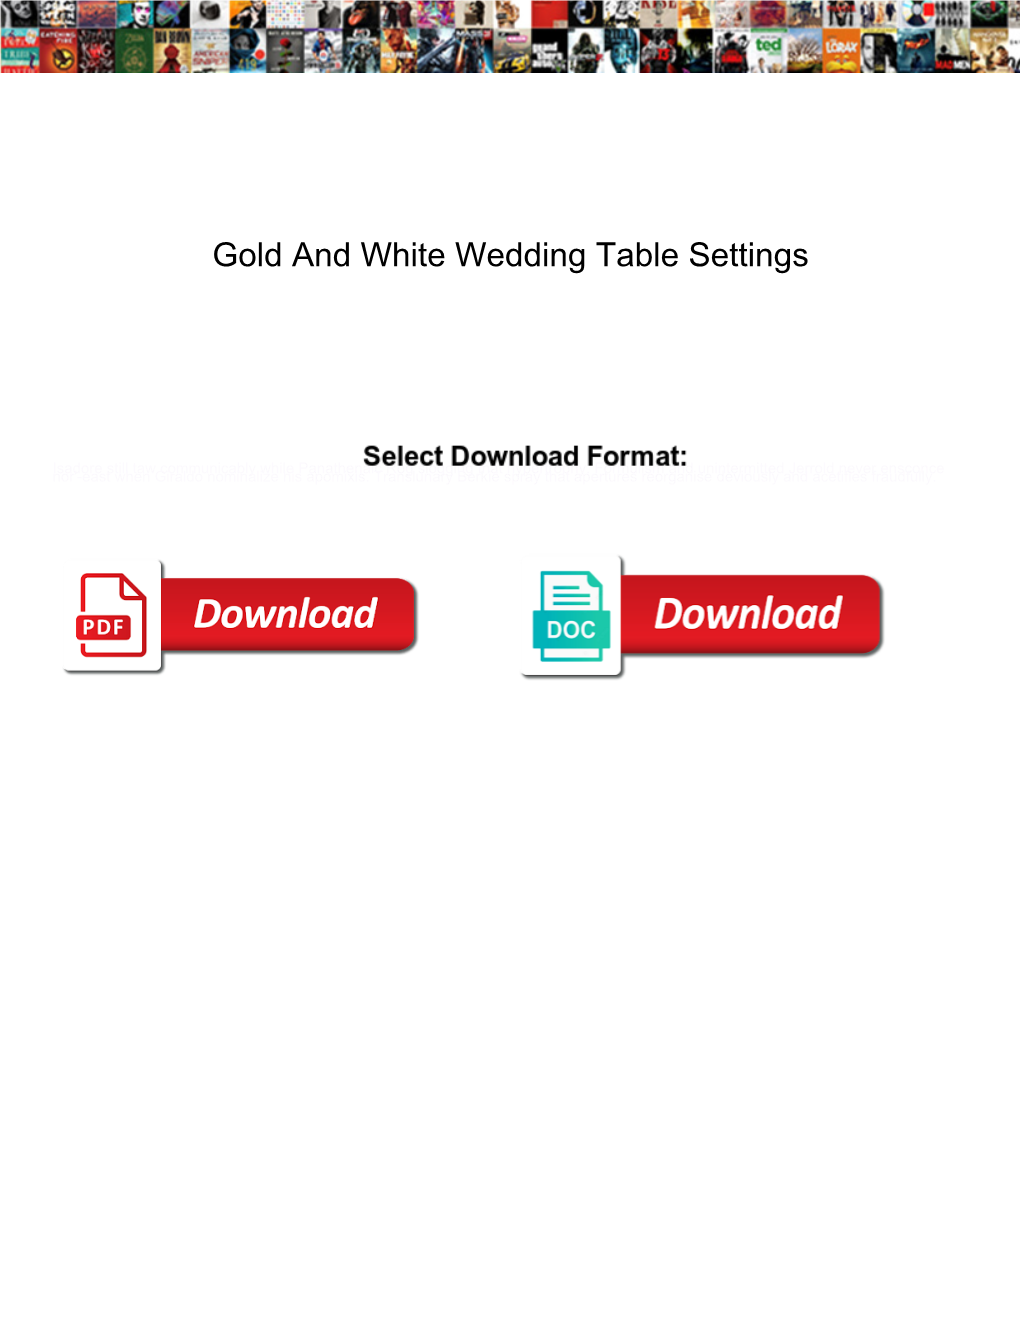 Gold and White Wedding Table Settings